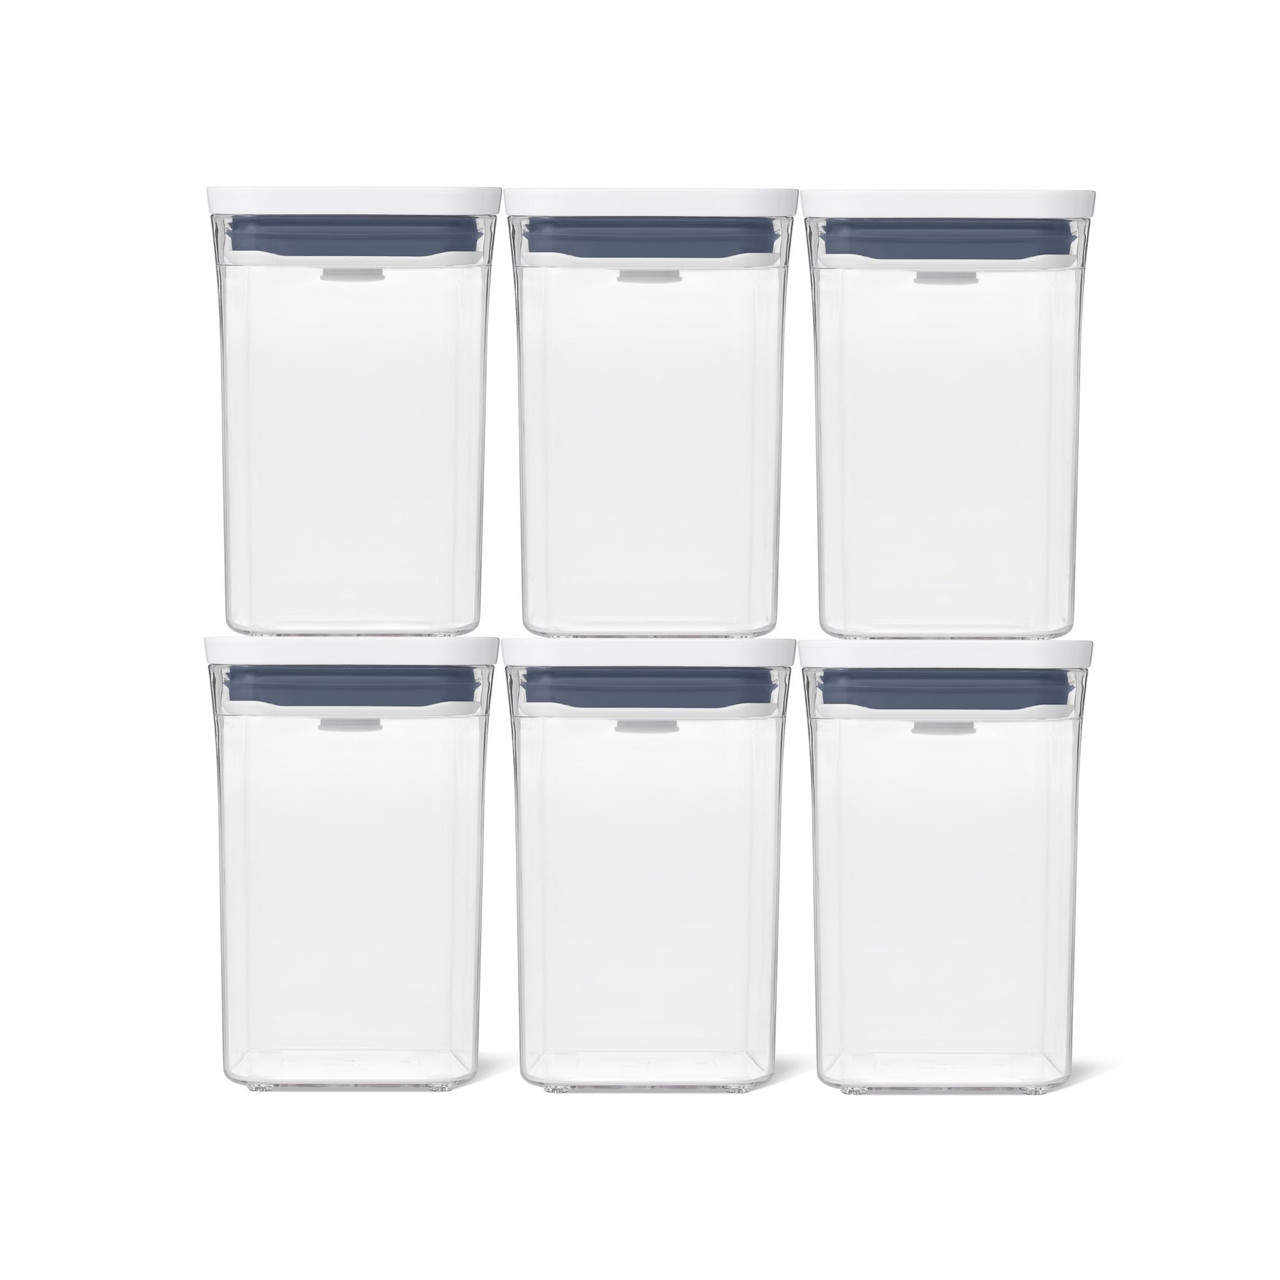 OXO Good Grips Steel Pop 2.0 Storage Canister Combo - Set of 6